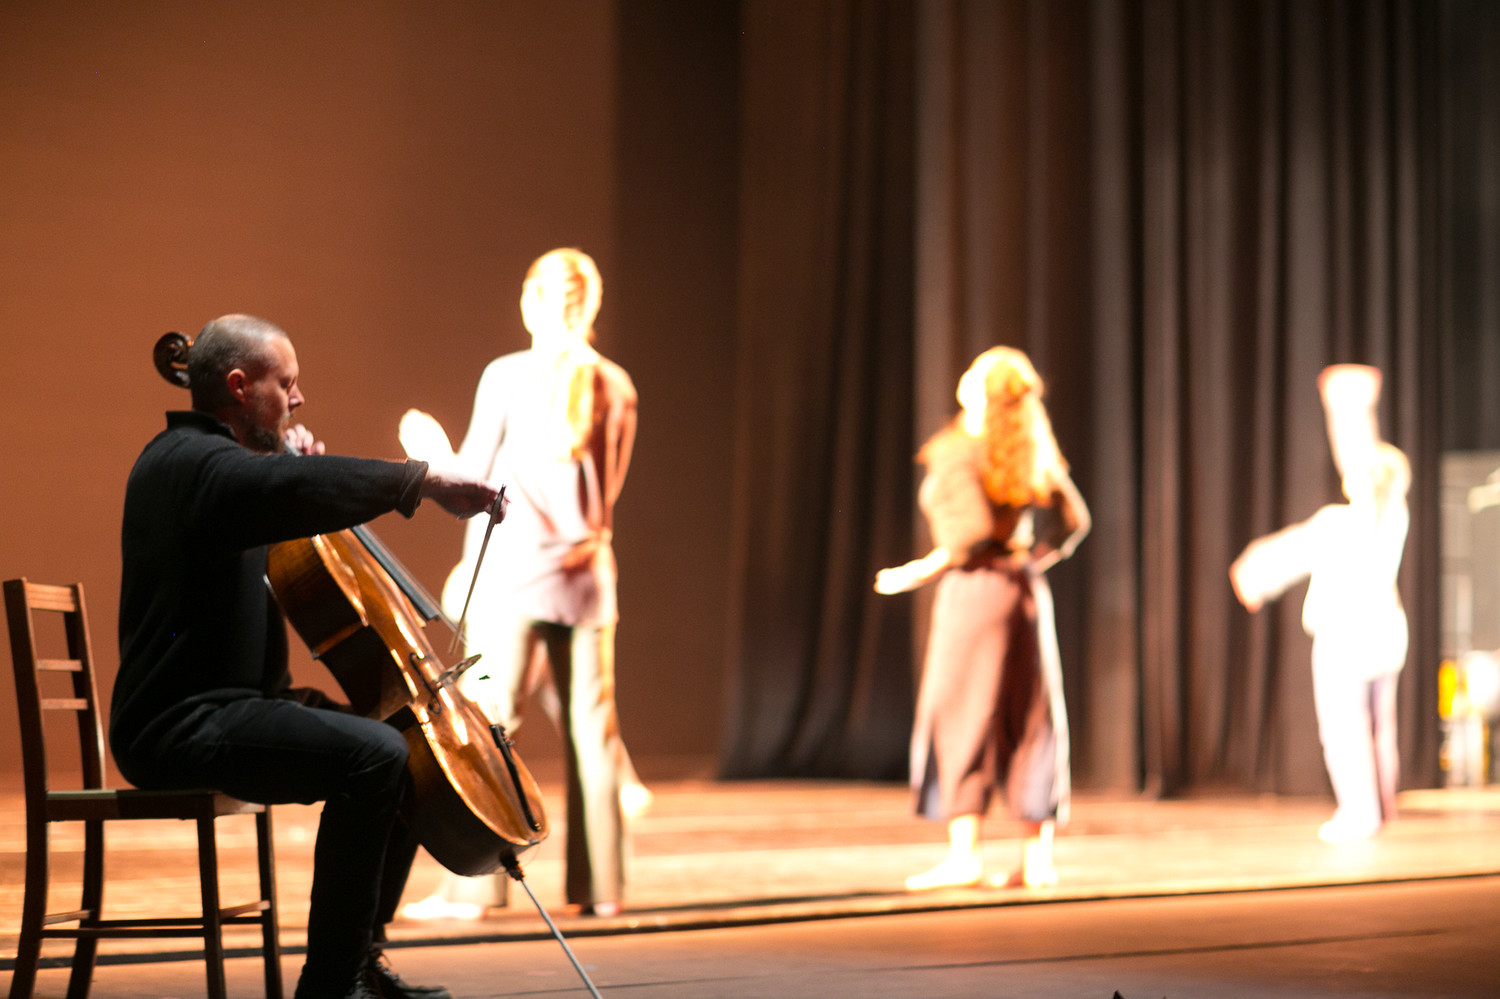 Cello player and dancers